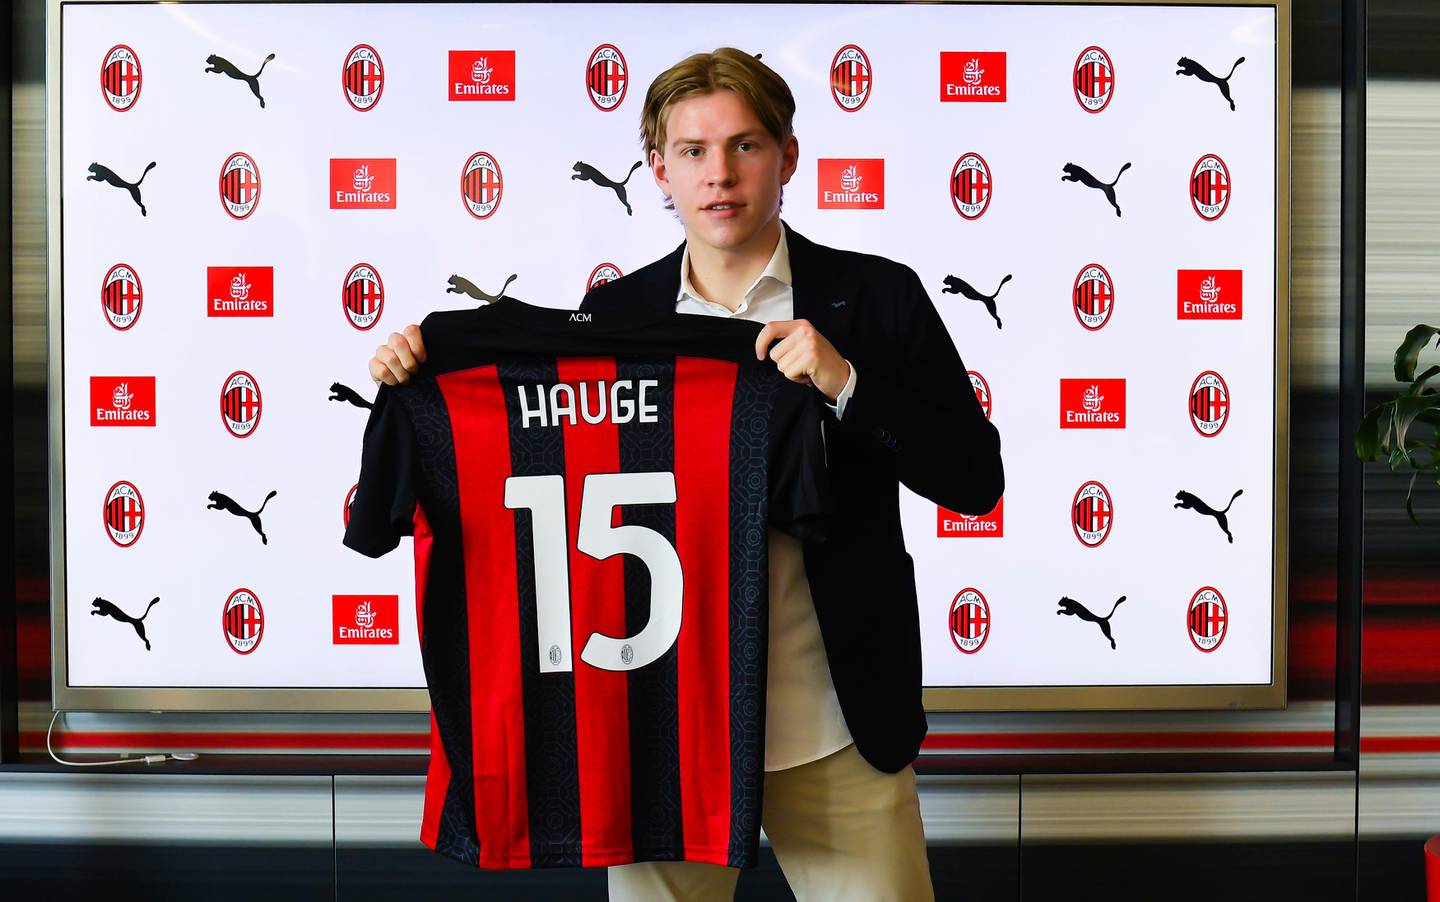 Norway's Jens Petter Hauge poses with his AC Milan's jersey during the official presentation at the Milan team headquarters, Italy, Thursday, Oct. 1, 2020. (Claudio Grassi/LaPresse via AP)